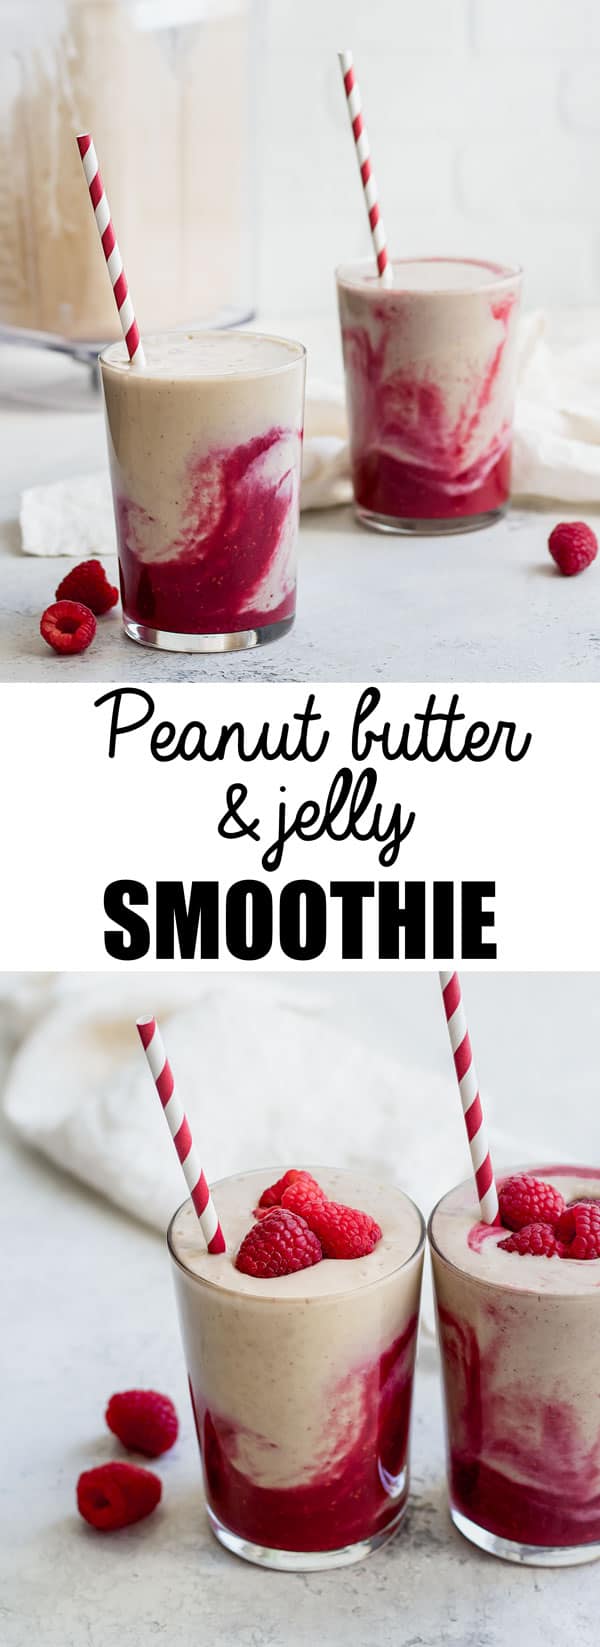 This peanut butter and jelly smoothie is a healthy and filling vegan breakfast that is loaded with protein!